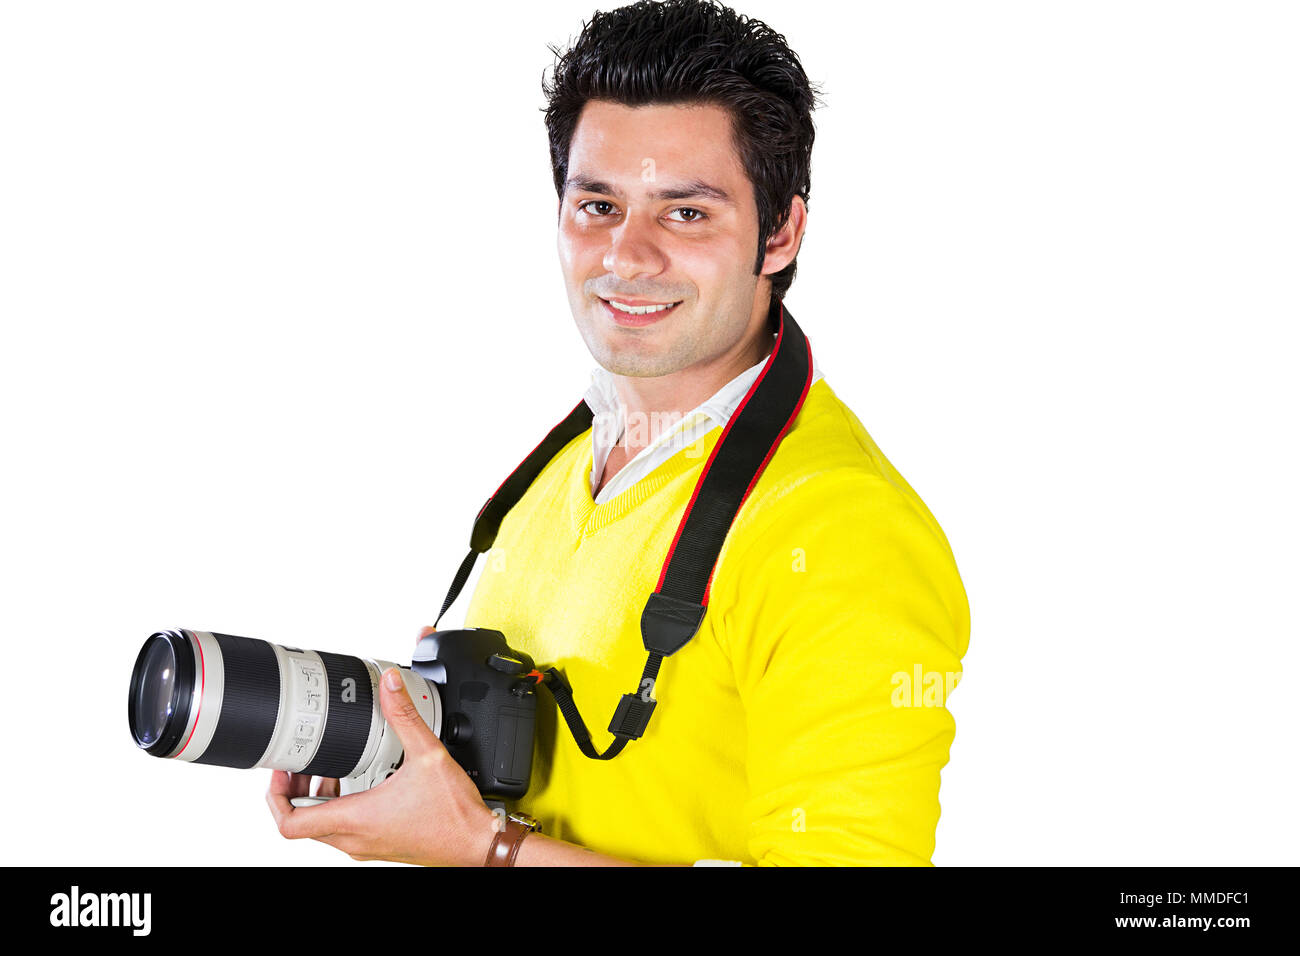 One Cameraman Holding Digital Camera clicking picture with DSLR Stock Photo